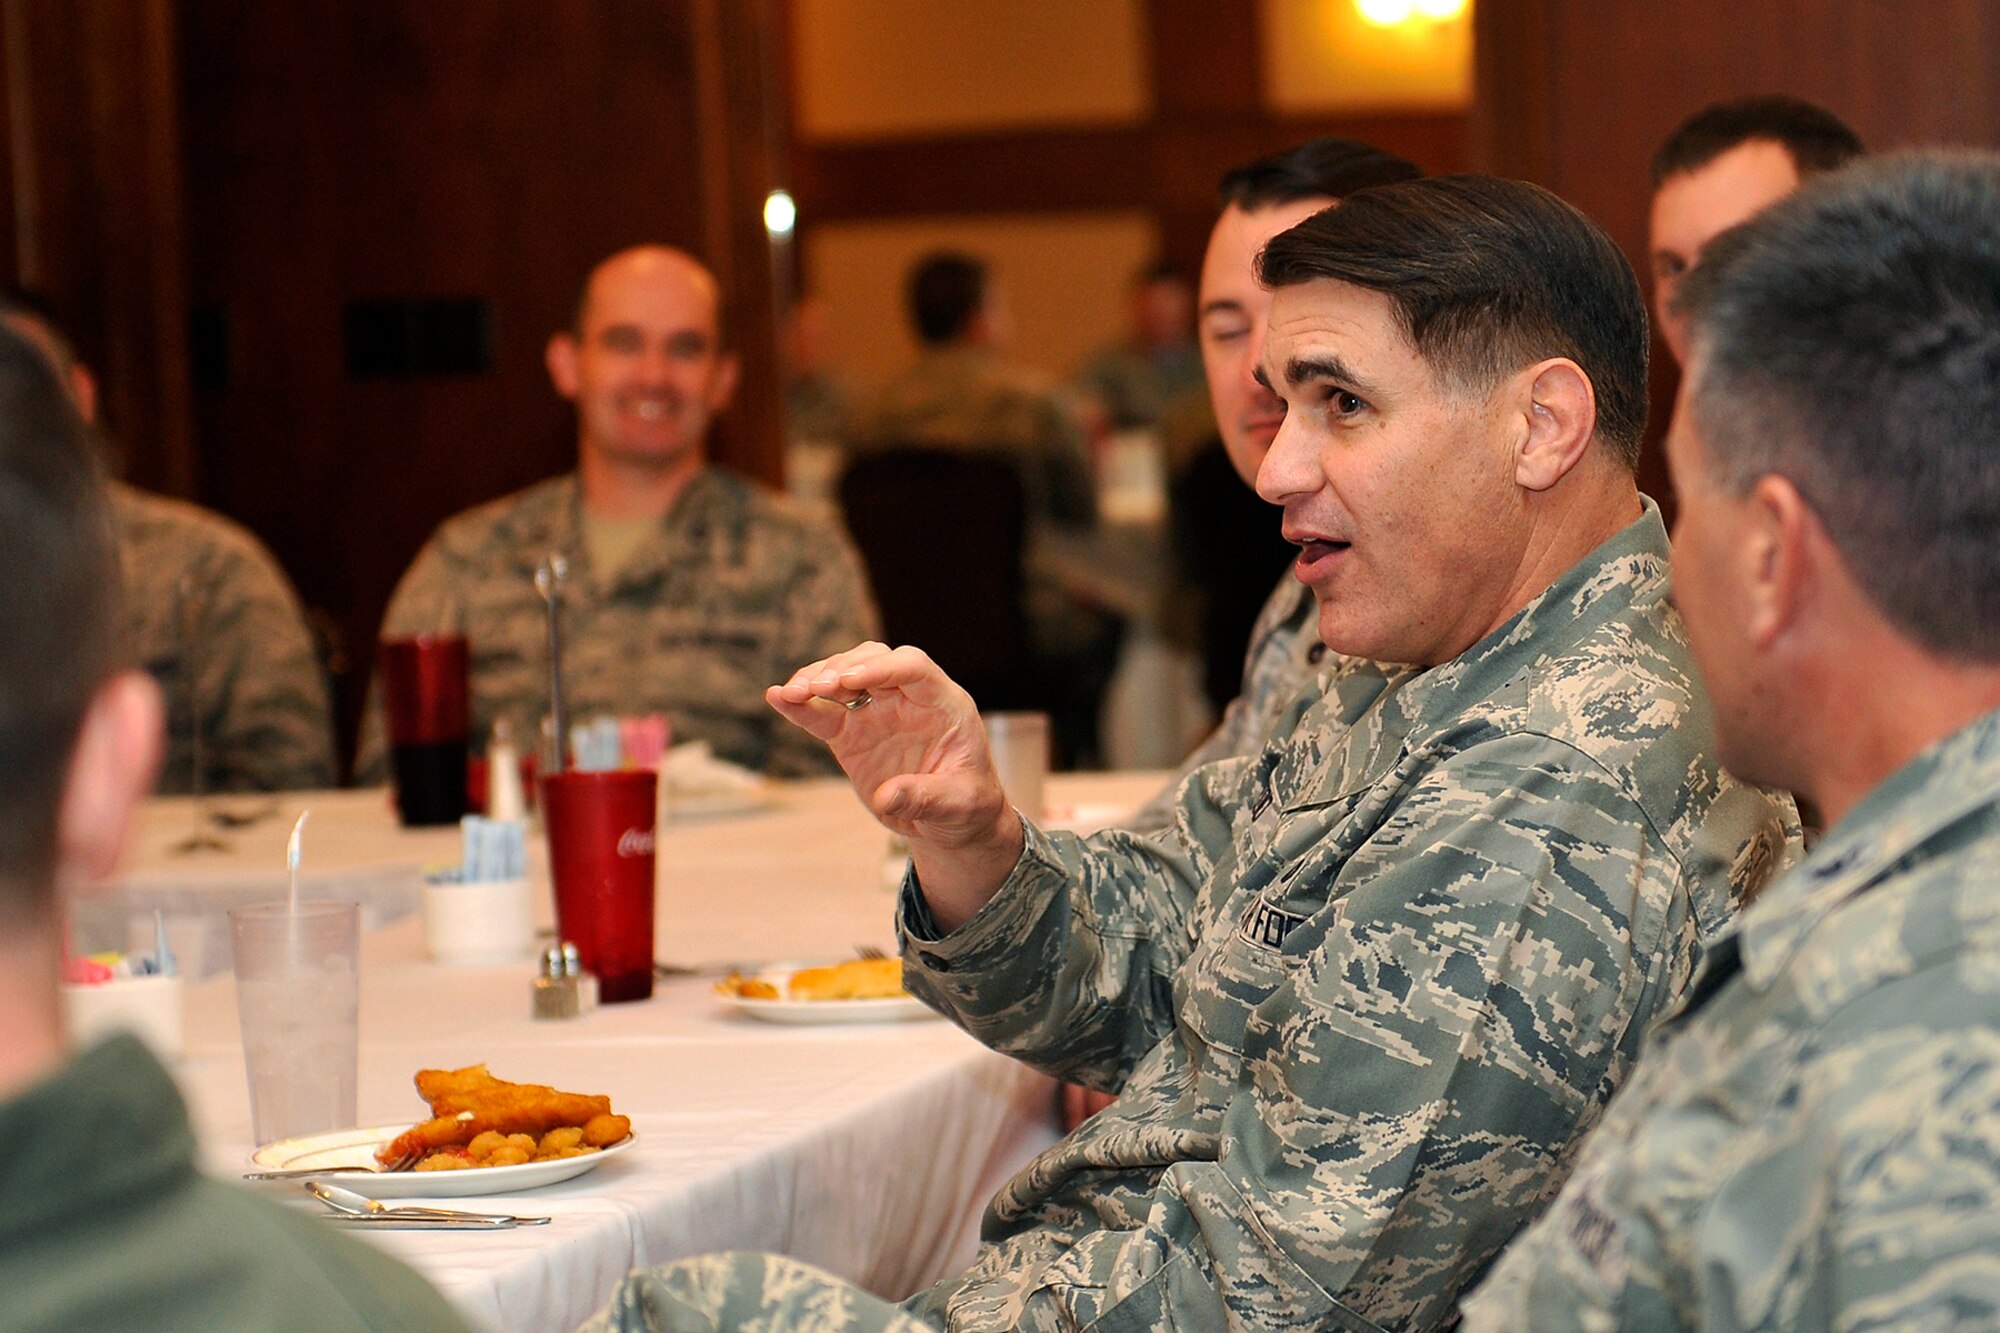 U.S. Air Force Maj. Gen. Bradford Shwedo, 25th Air Force commander, opens the floor for questions during lunch with Company Grade Officers Oct. 14 at Offutt Air Force Base, Neb. Shwedo visited several units to thank members of Team Offutt for their duty. (U.S. Air Force photo by Jeff W. Gates/Released)